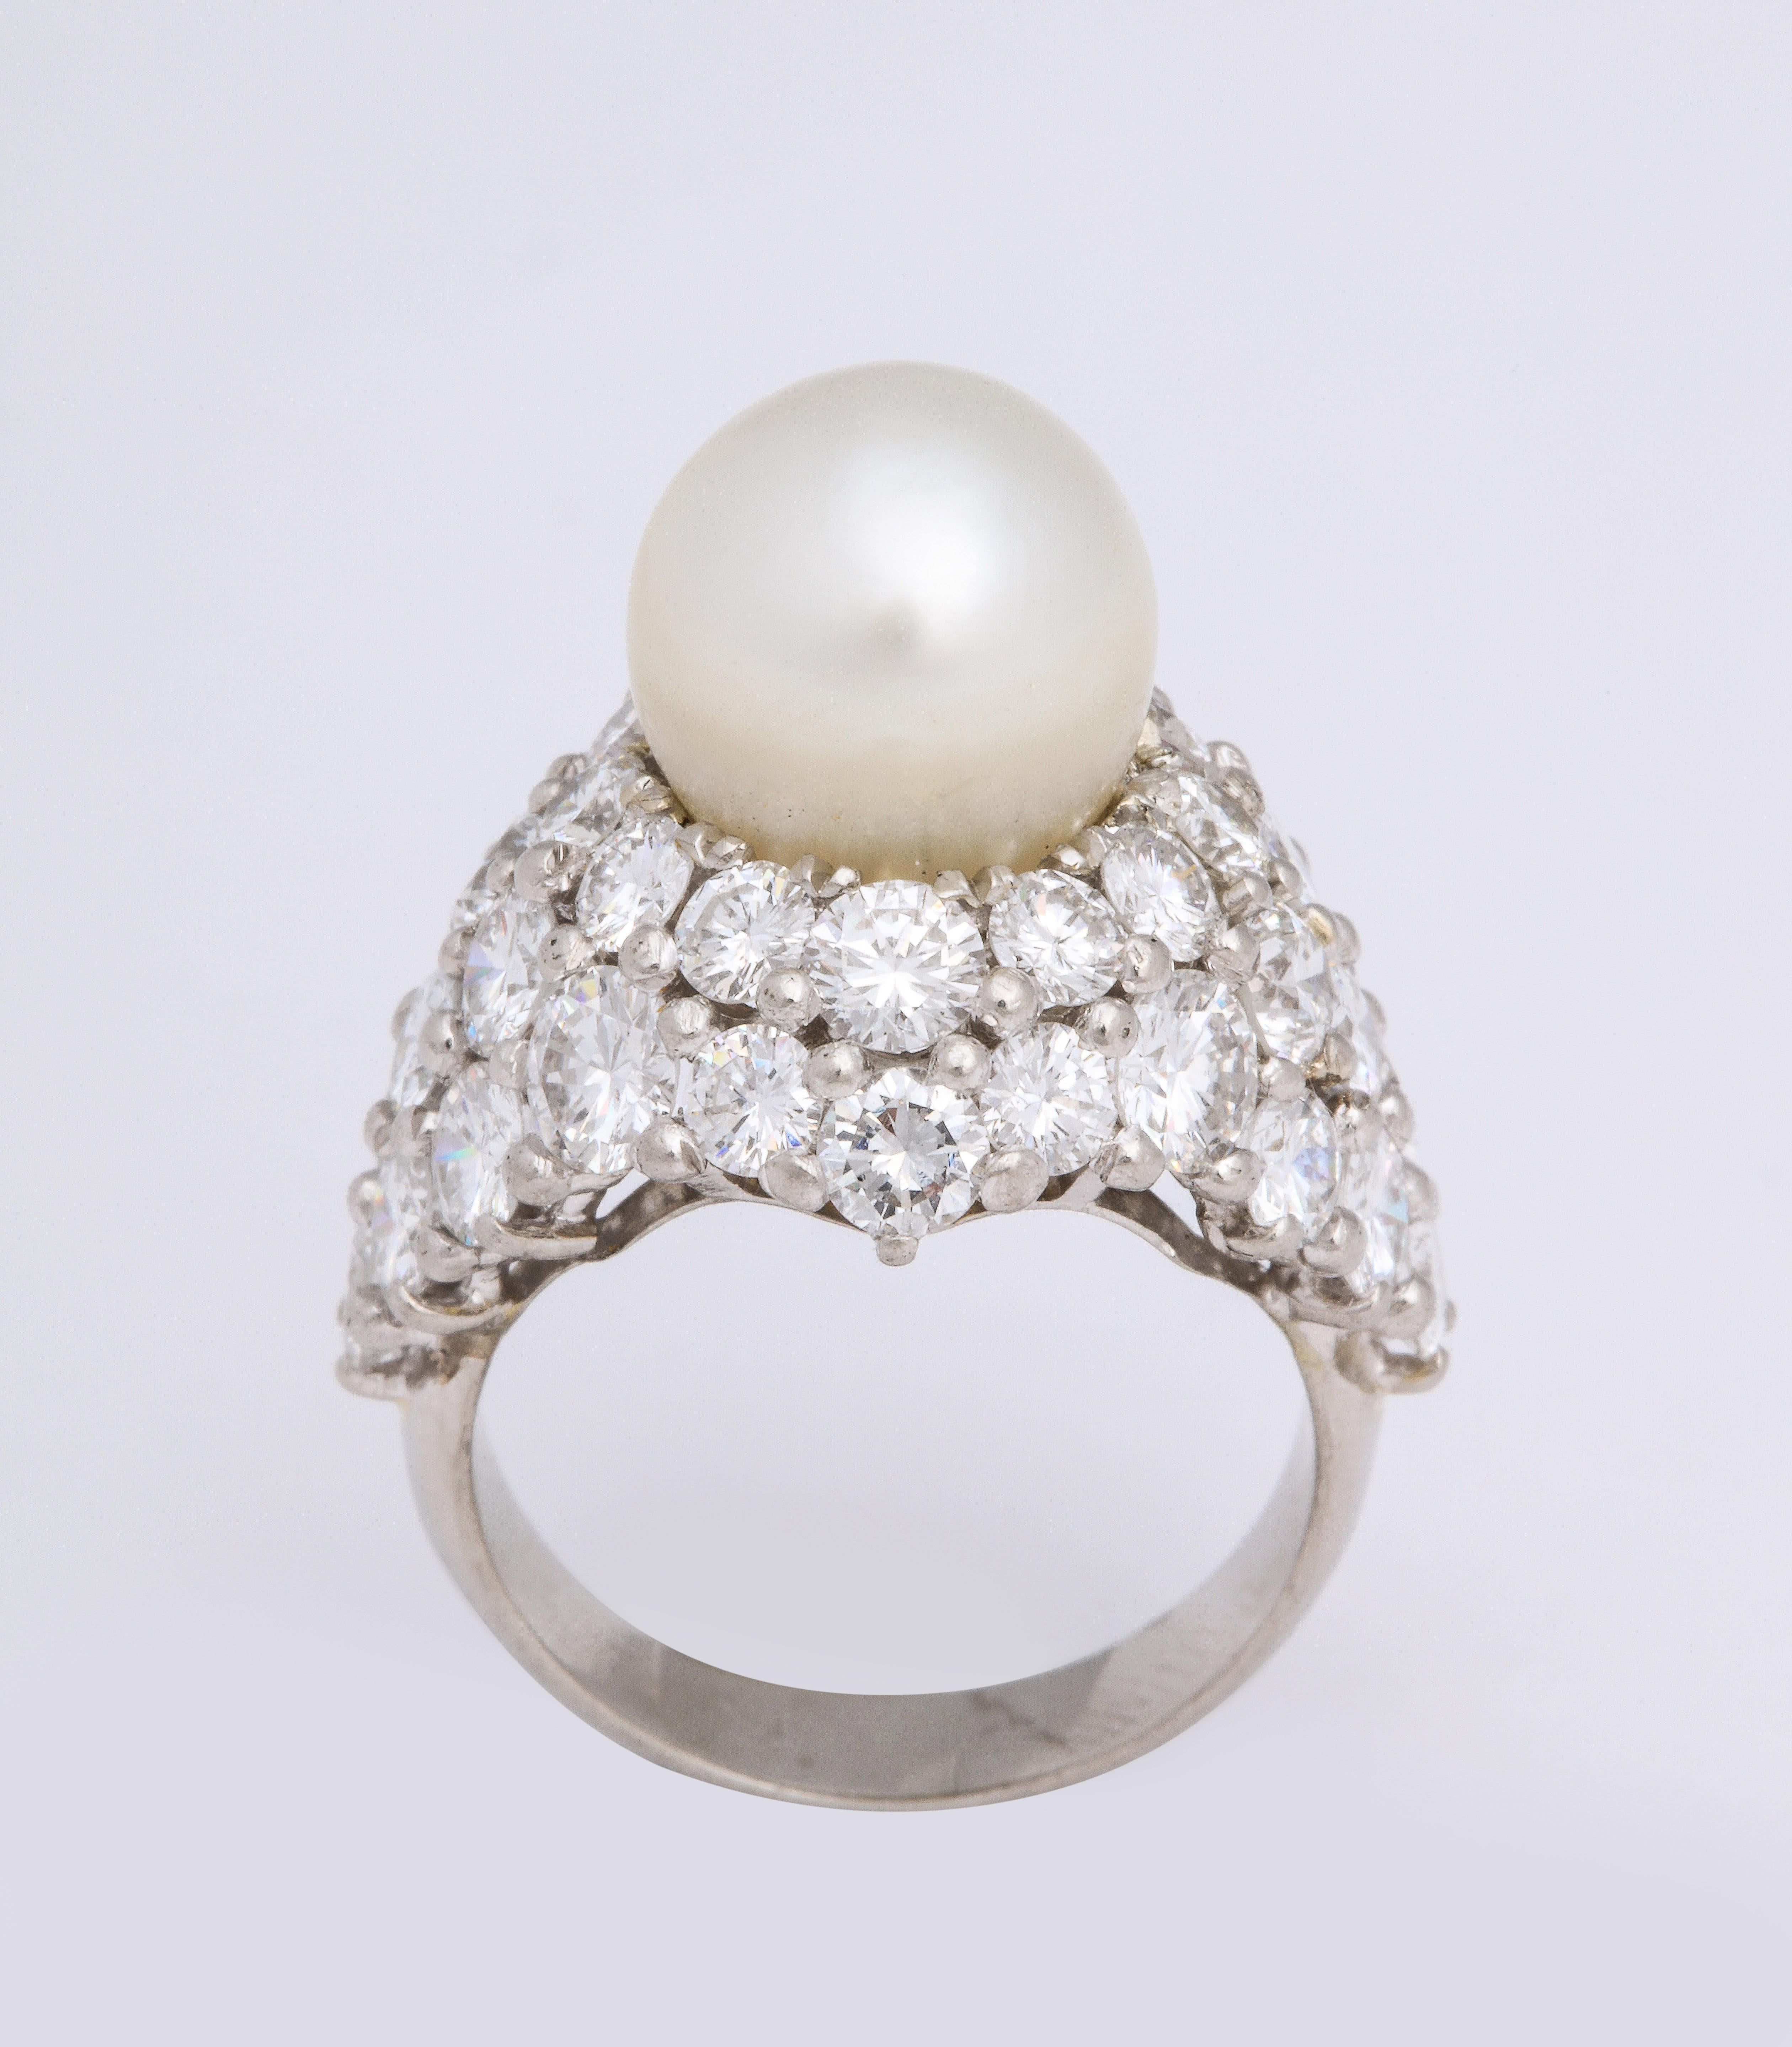 A bright and beautiful compact design of a classic platinum ring that features a gem-y, little natural pearl in a high domed diamond pave setting using the royal pave technique.  This pearl has is white with slight cream and pink undertones.  The